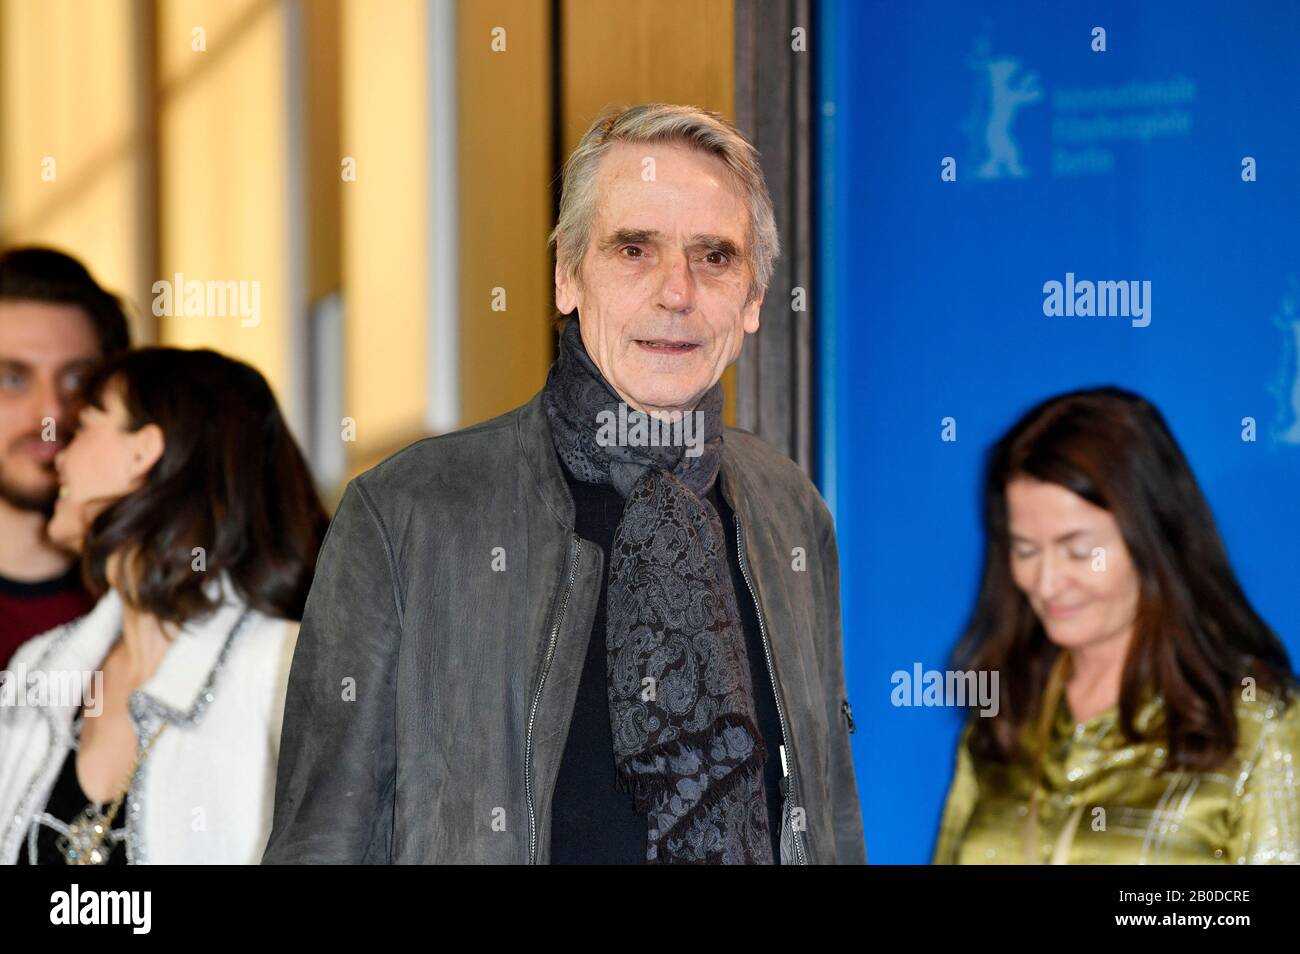 Berlin, Germany. 20th Feb, 2020. Jeremy Irons during the jury photocall at the 70th Berlin International Film Festival/Berlinale 2020 at Hotel Grand Hyatt on February 20, 2020 in Berlin, Germany. Credit: Geisler-Fotopress GmbH/Alamy Live News Stock Photo